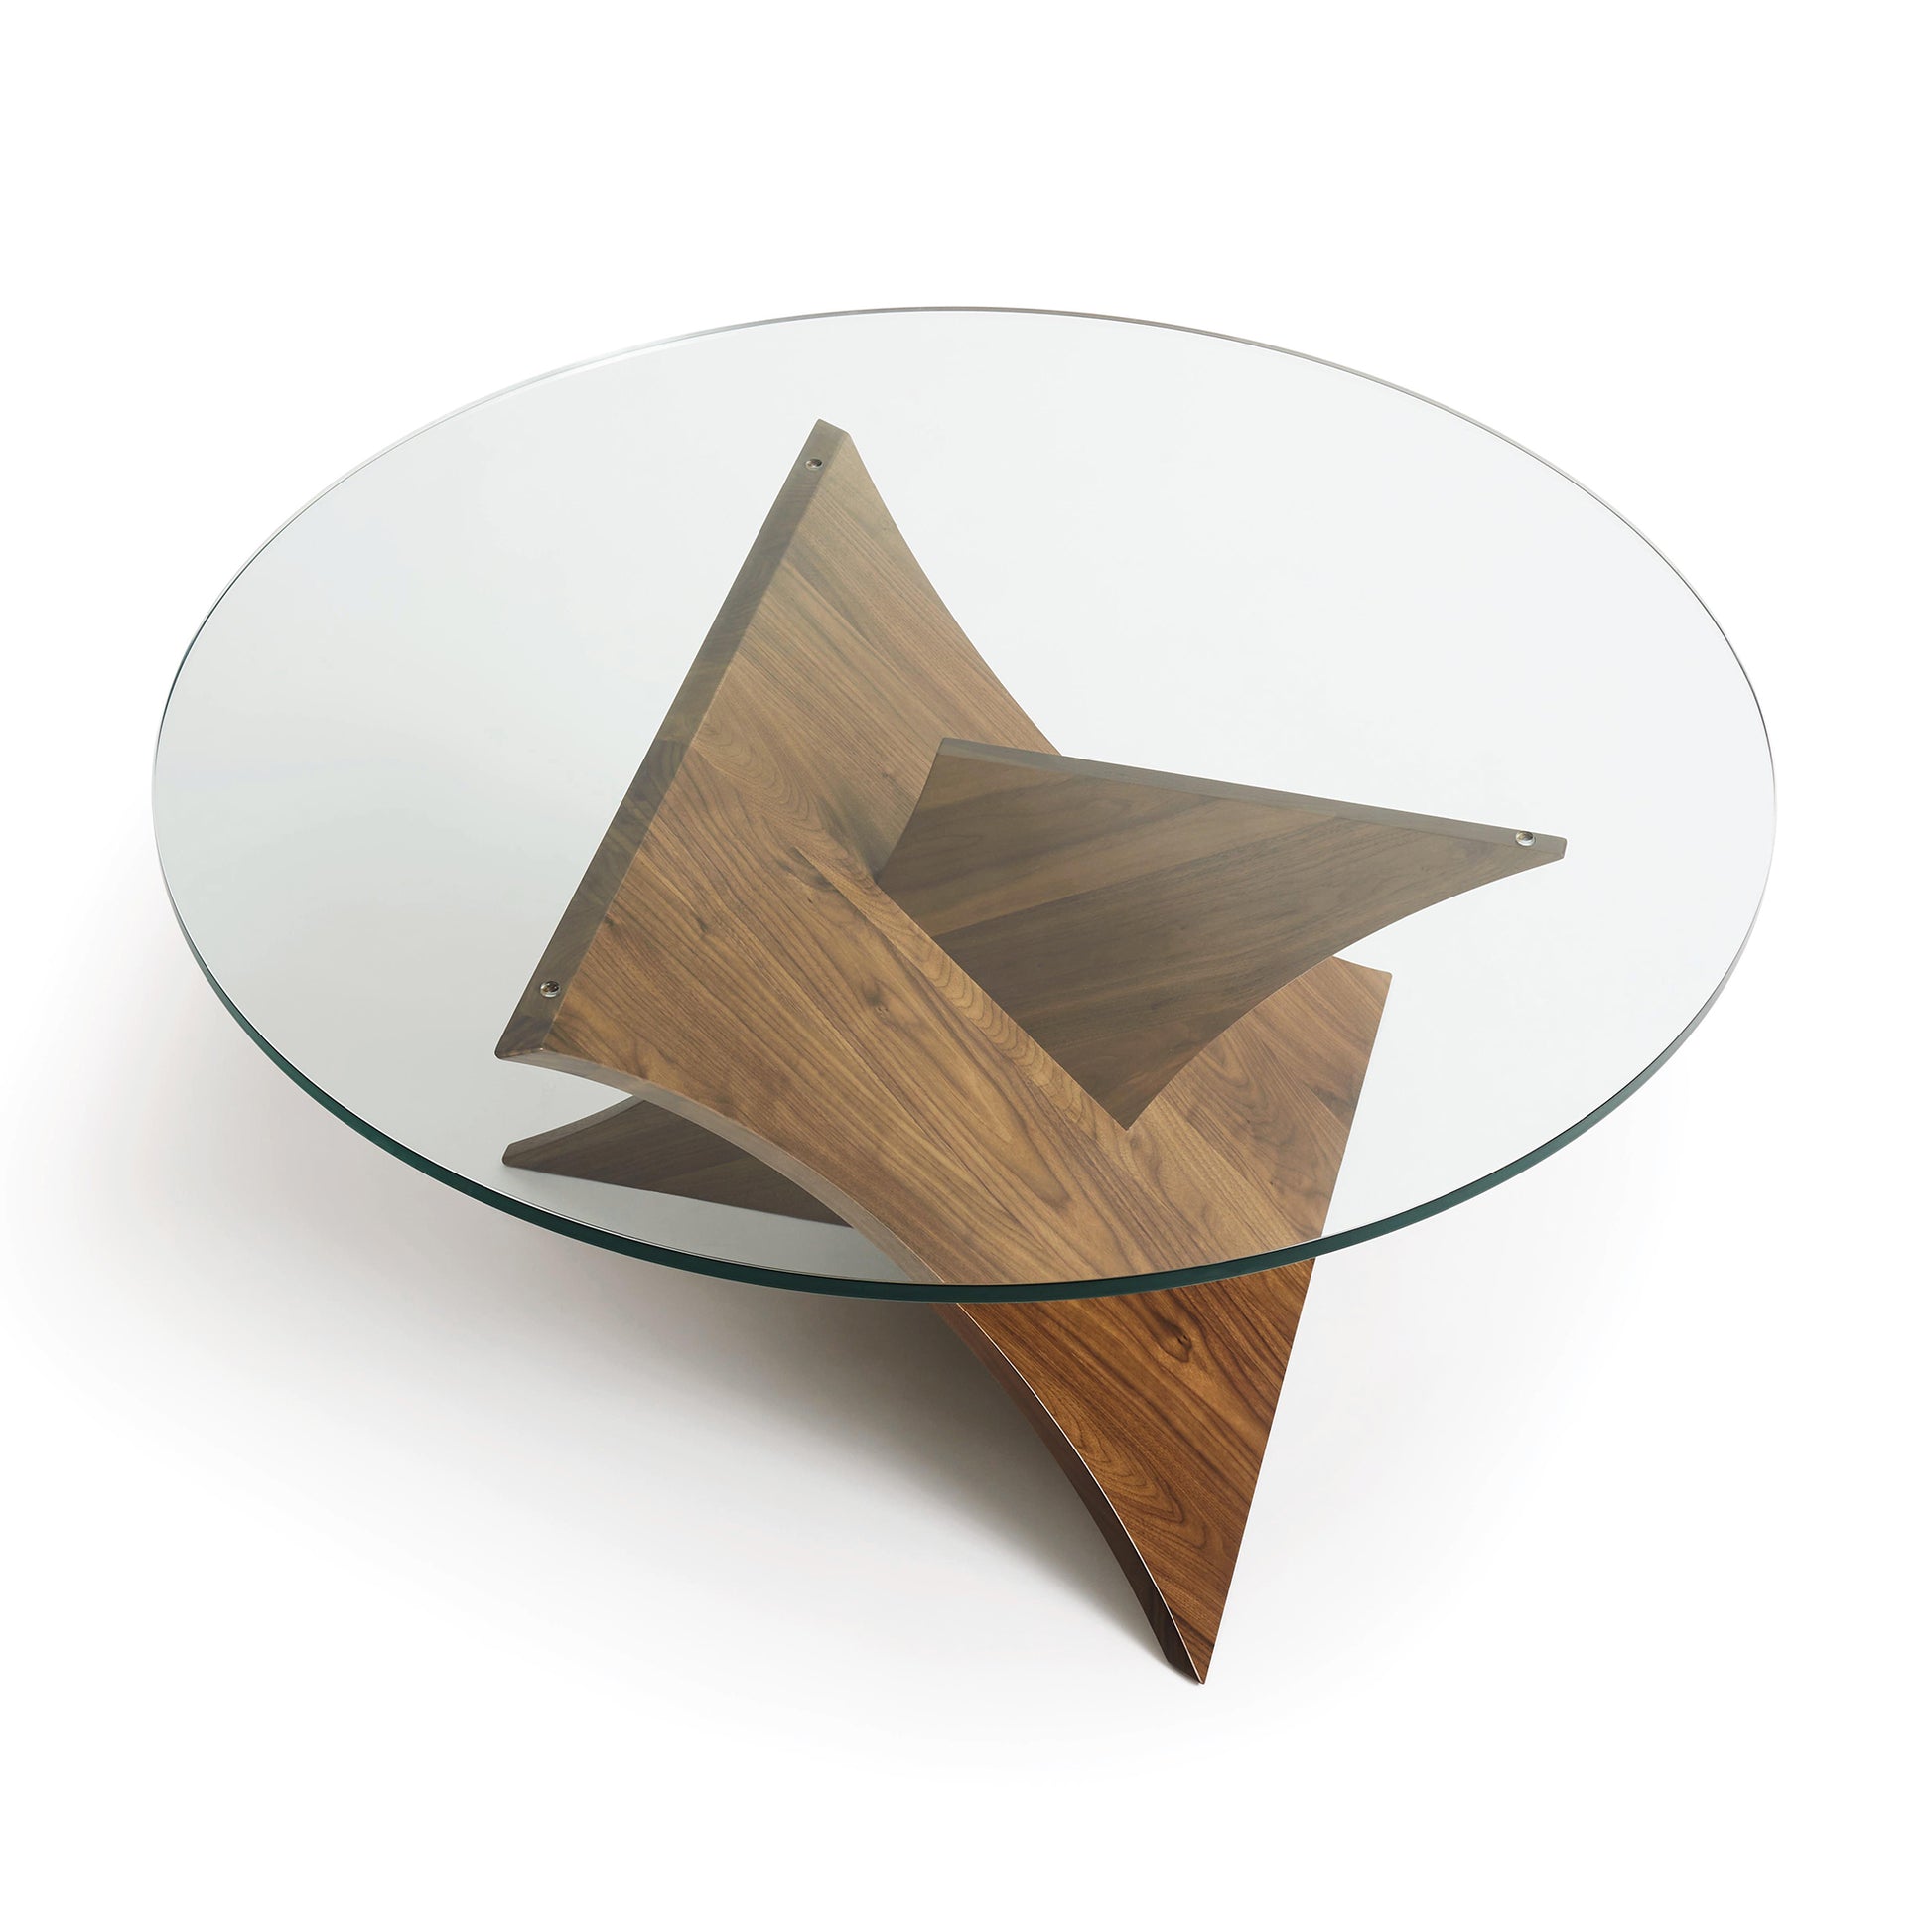 A modern Copeland Furniture Planes Round Glass Top Coffee Table with a tempered glass top resting on a wooden base shaped like a three-dimensional star.